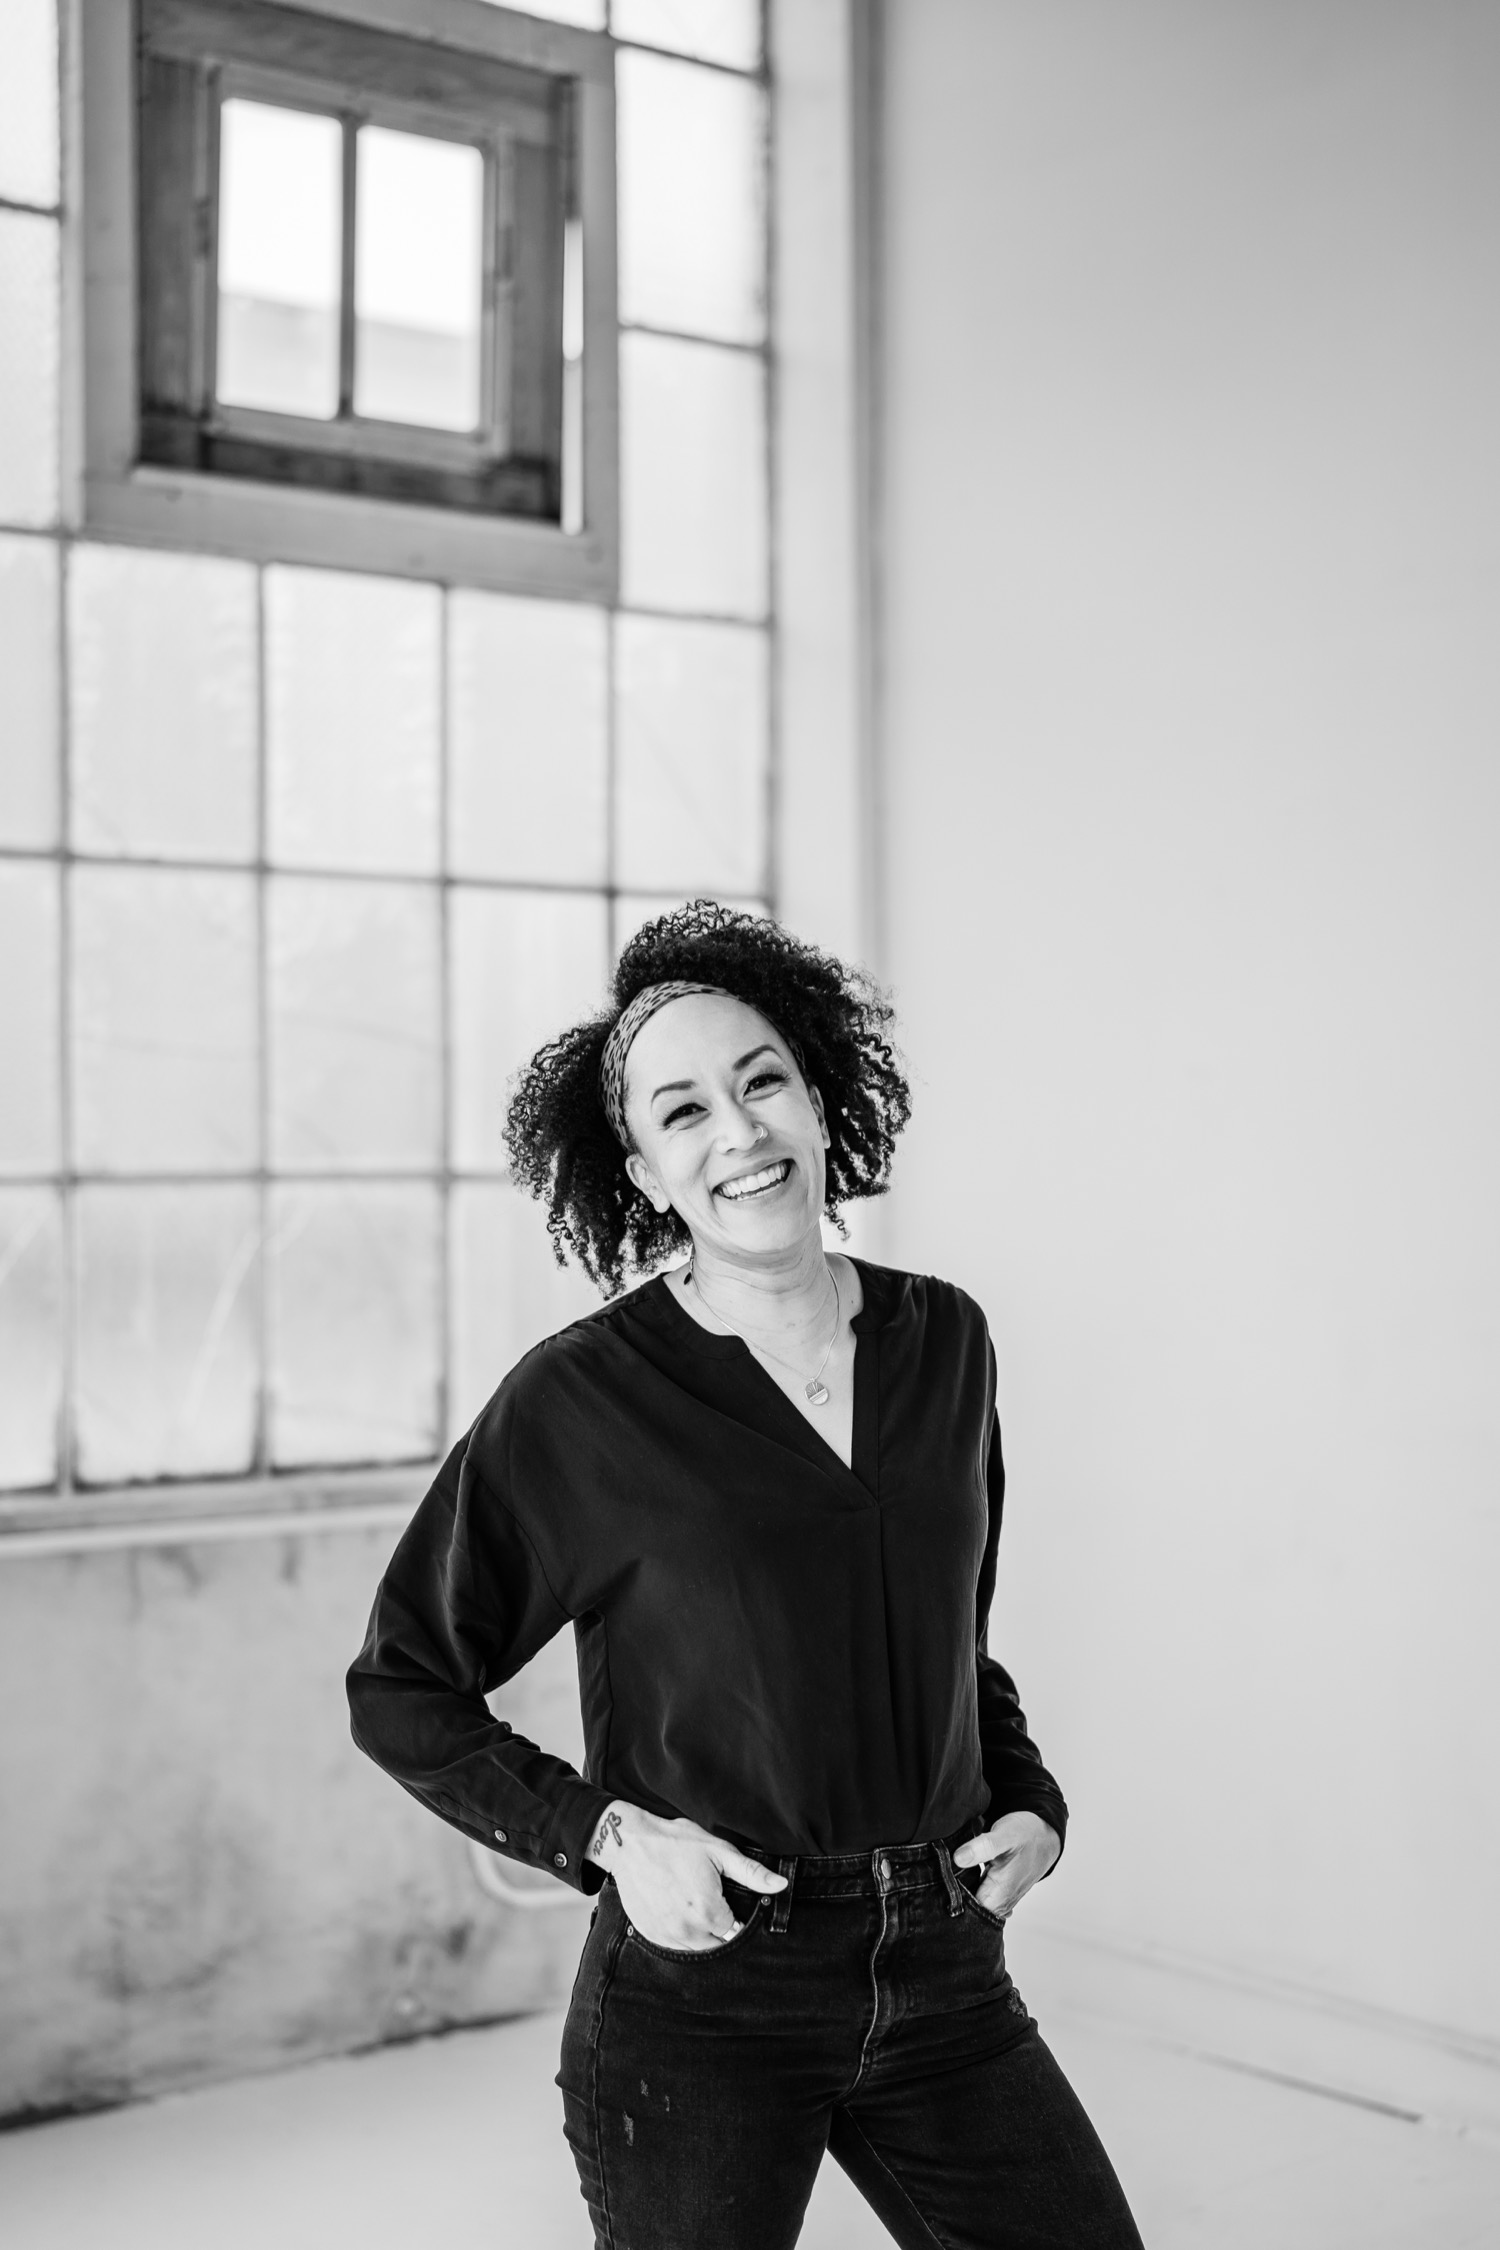 Black and white portrait with woman smiling and laughing